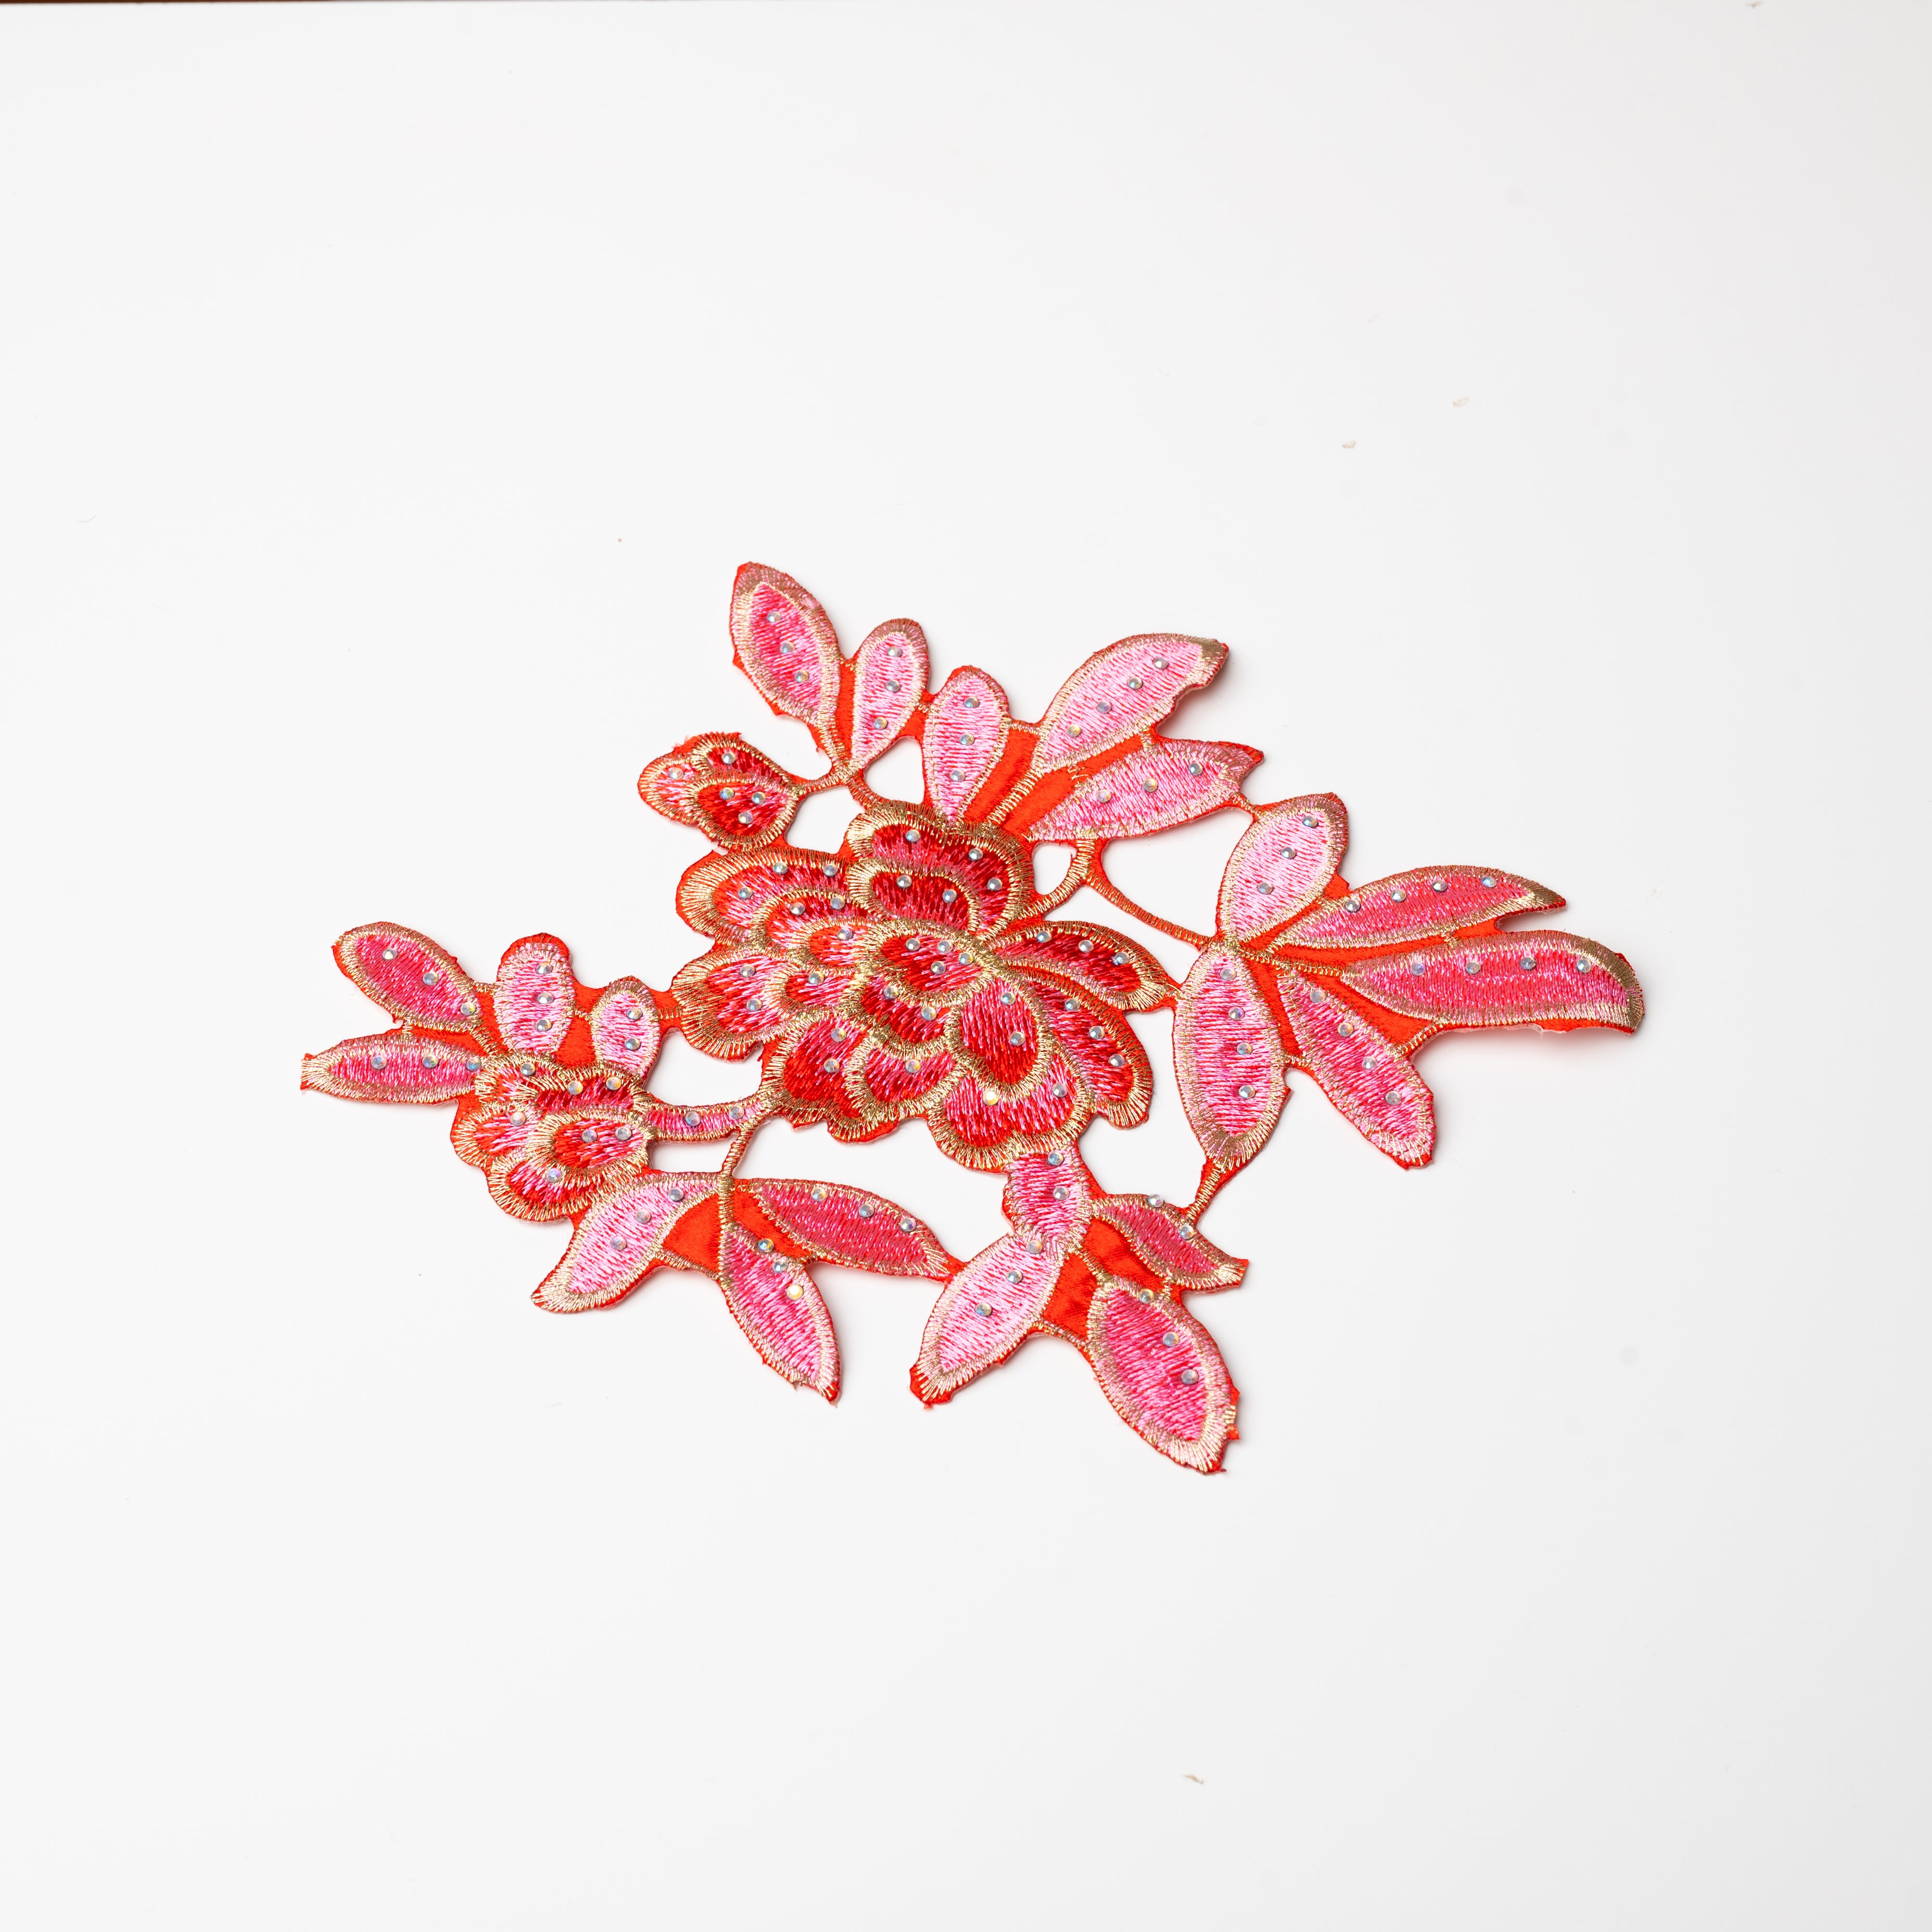 Heavily embroidered pink, red and gold floral iron on applique scattered with hot fix AB crystals.  The petals and leaves are predominantly pink and are outlined with gold thread.